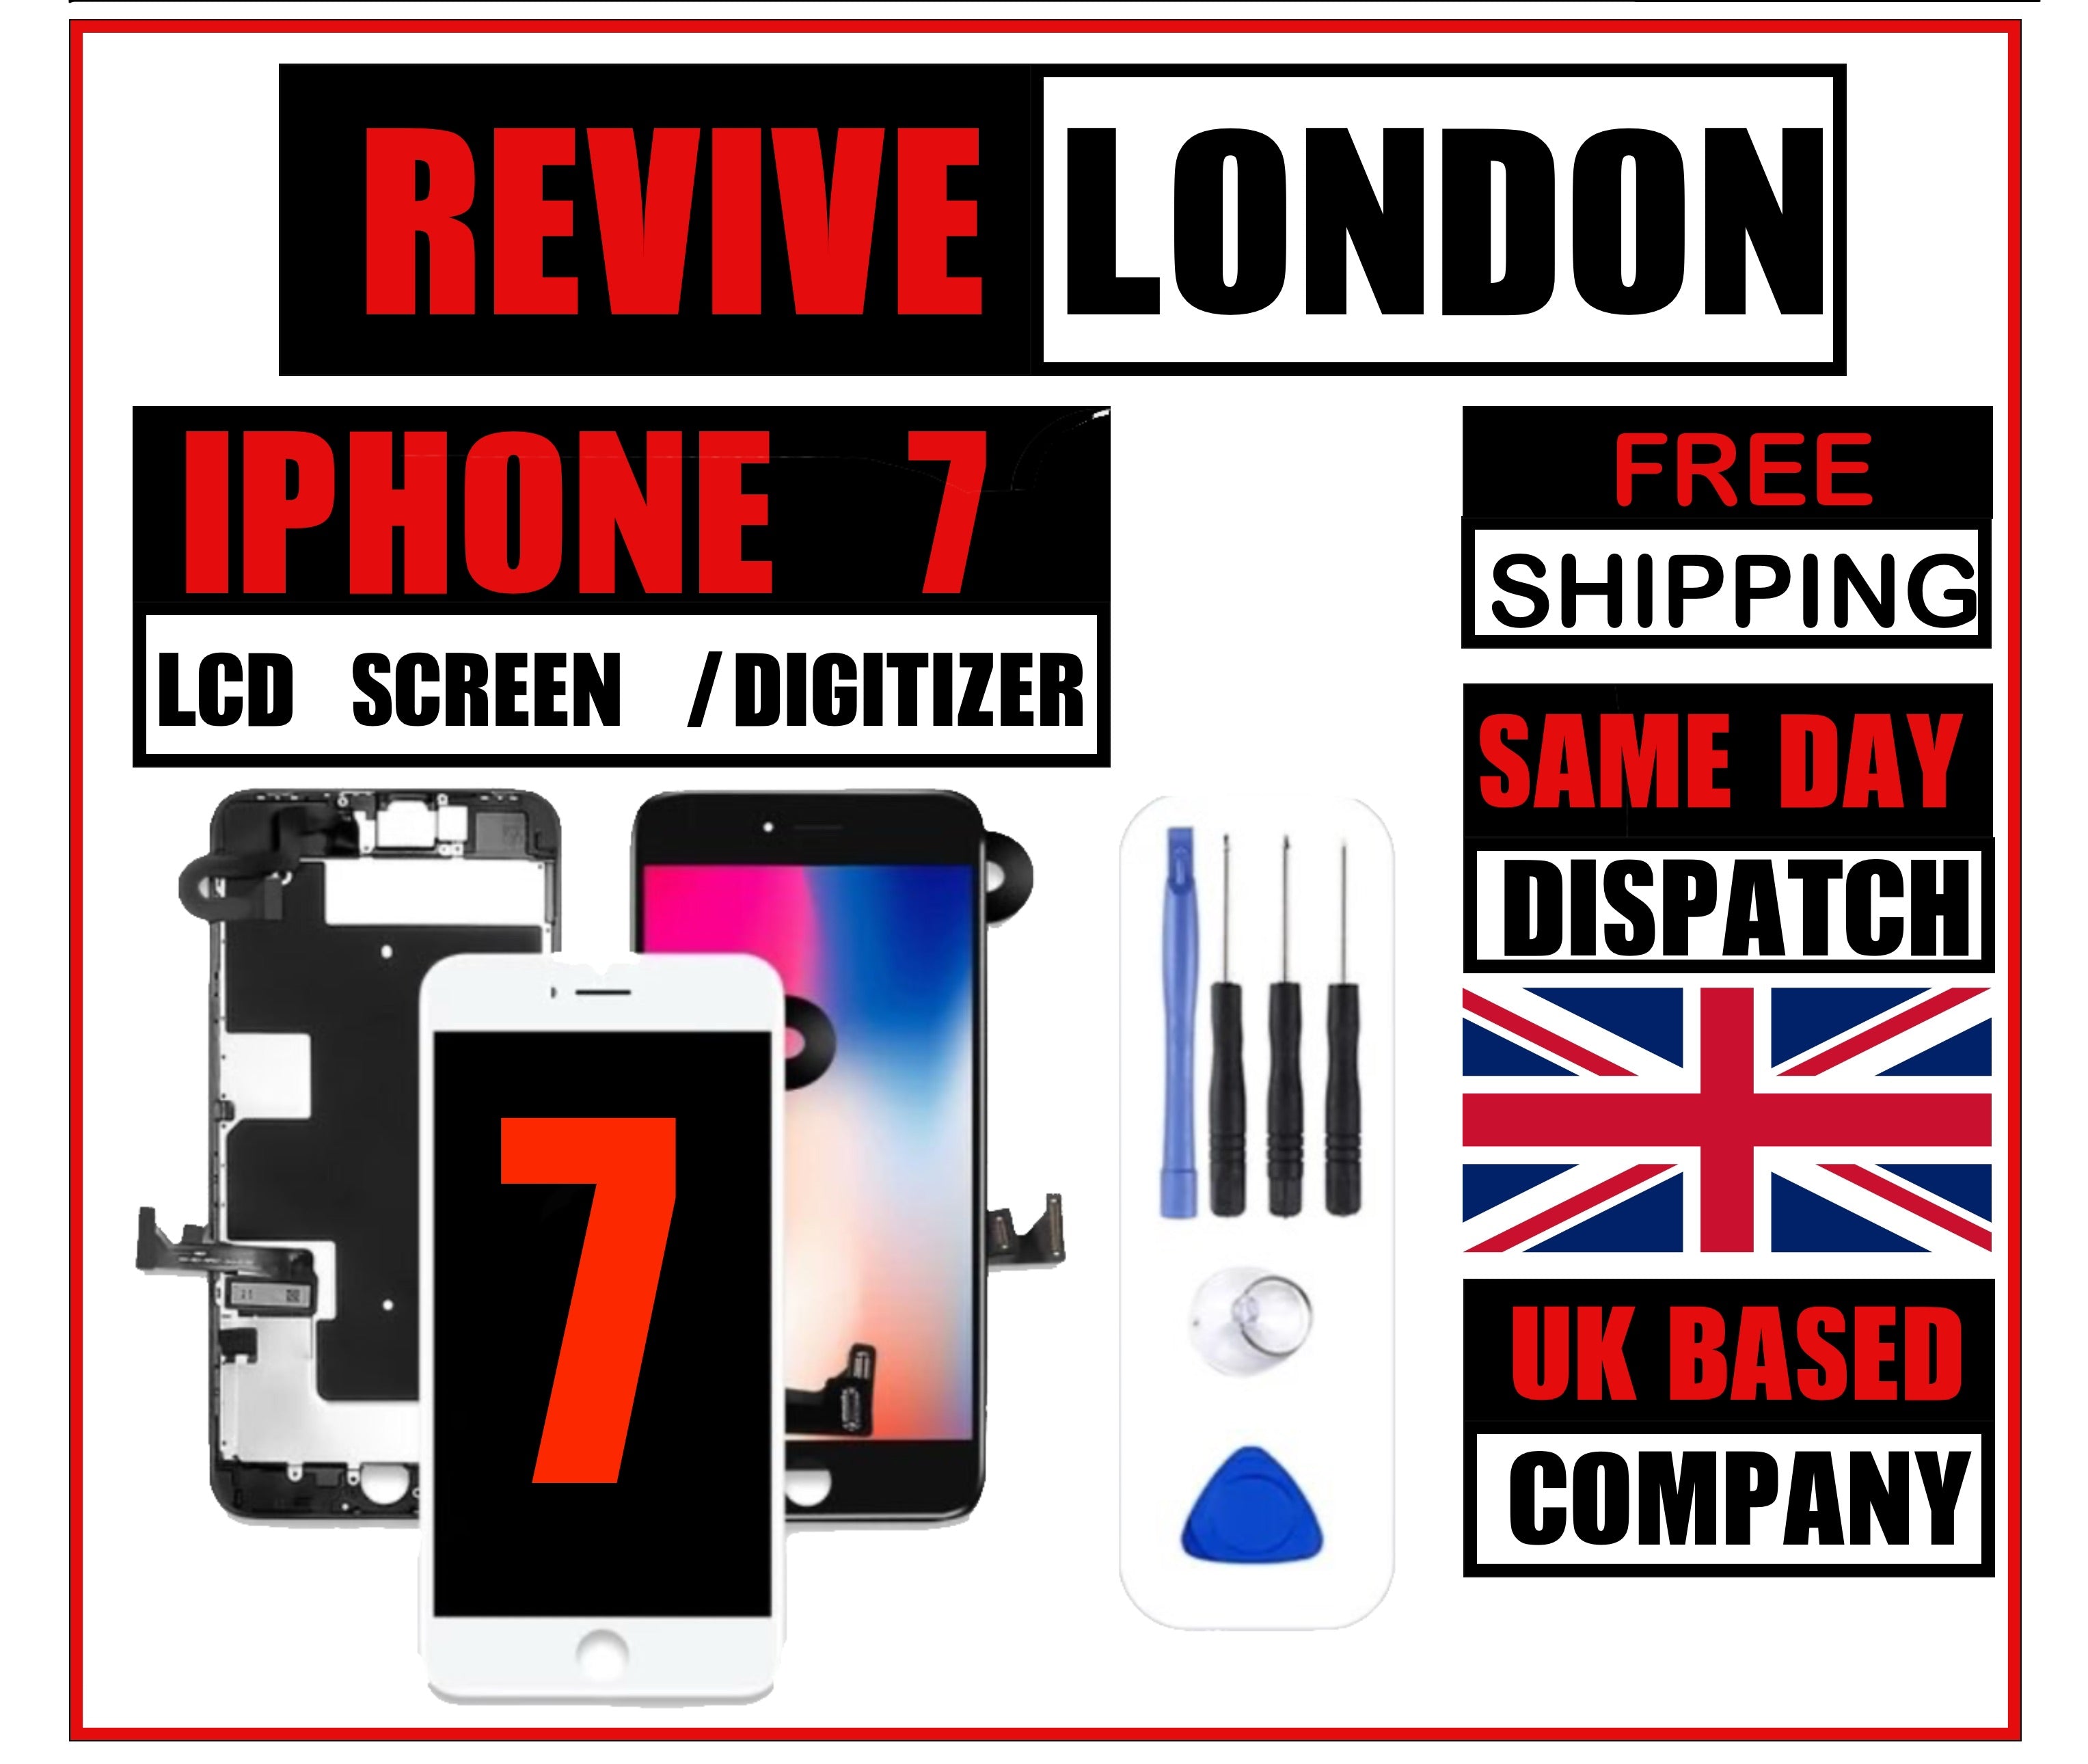 For iPhone 7 LCD Screen Replacement 3D Touch Digitizer Retina Display